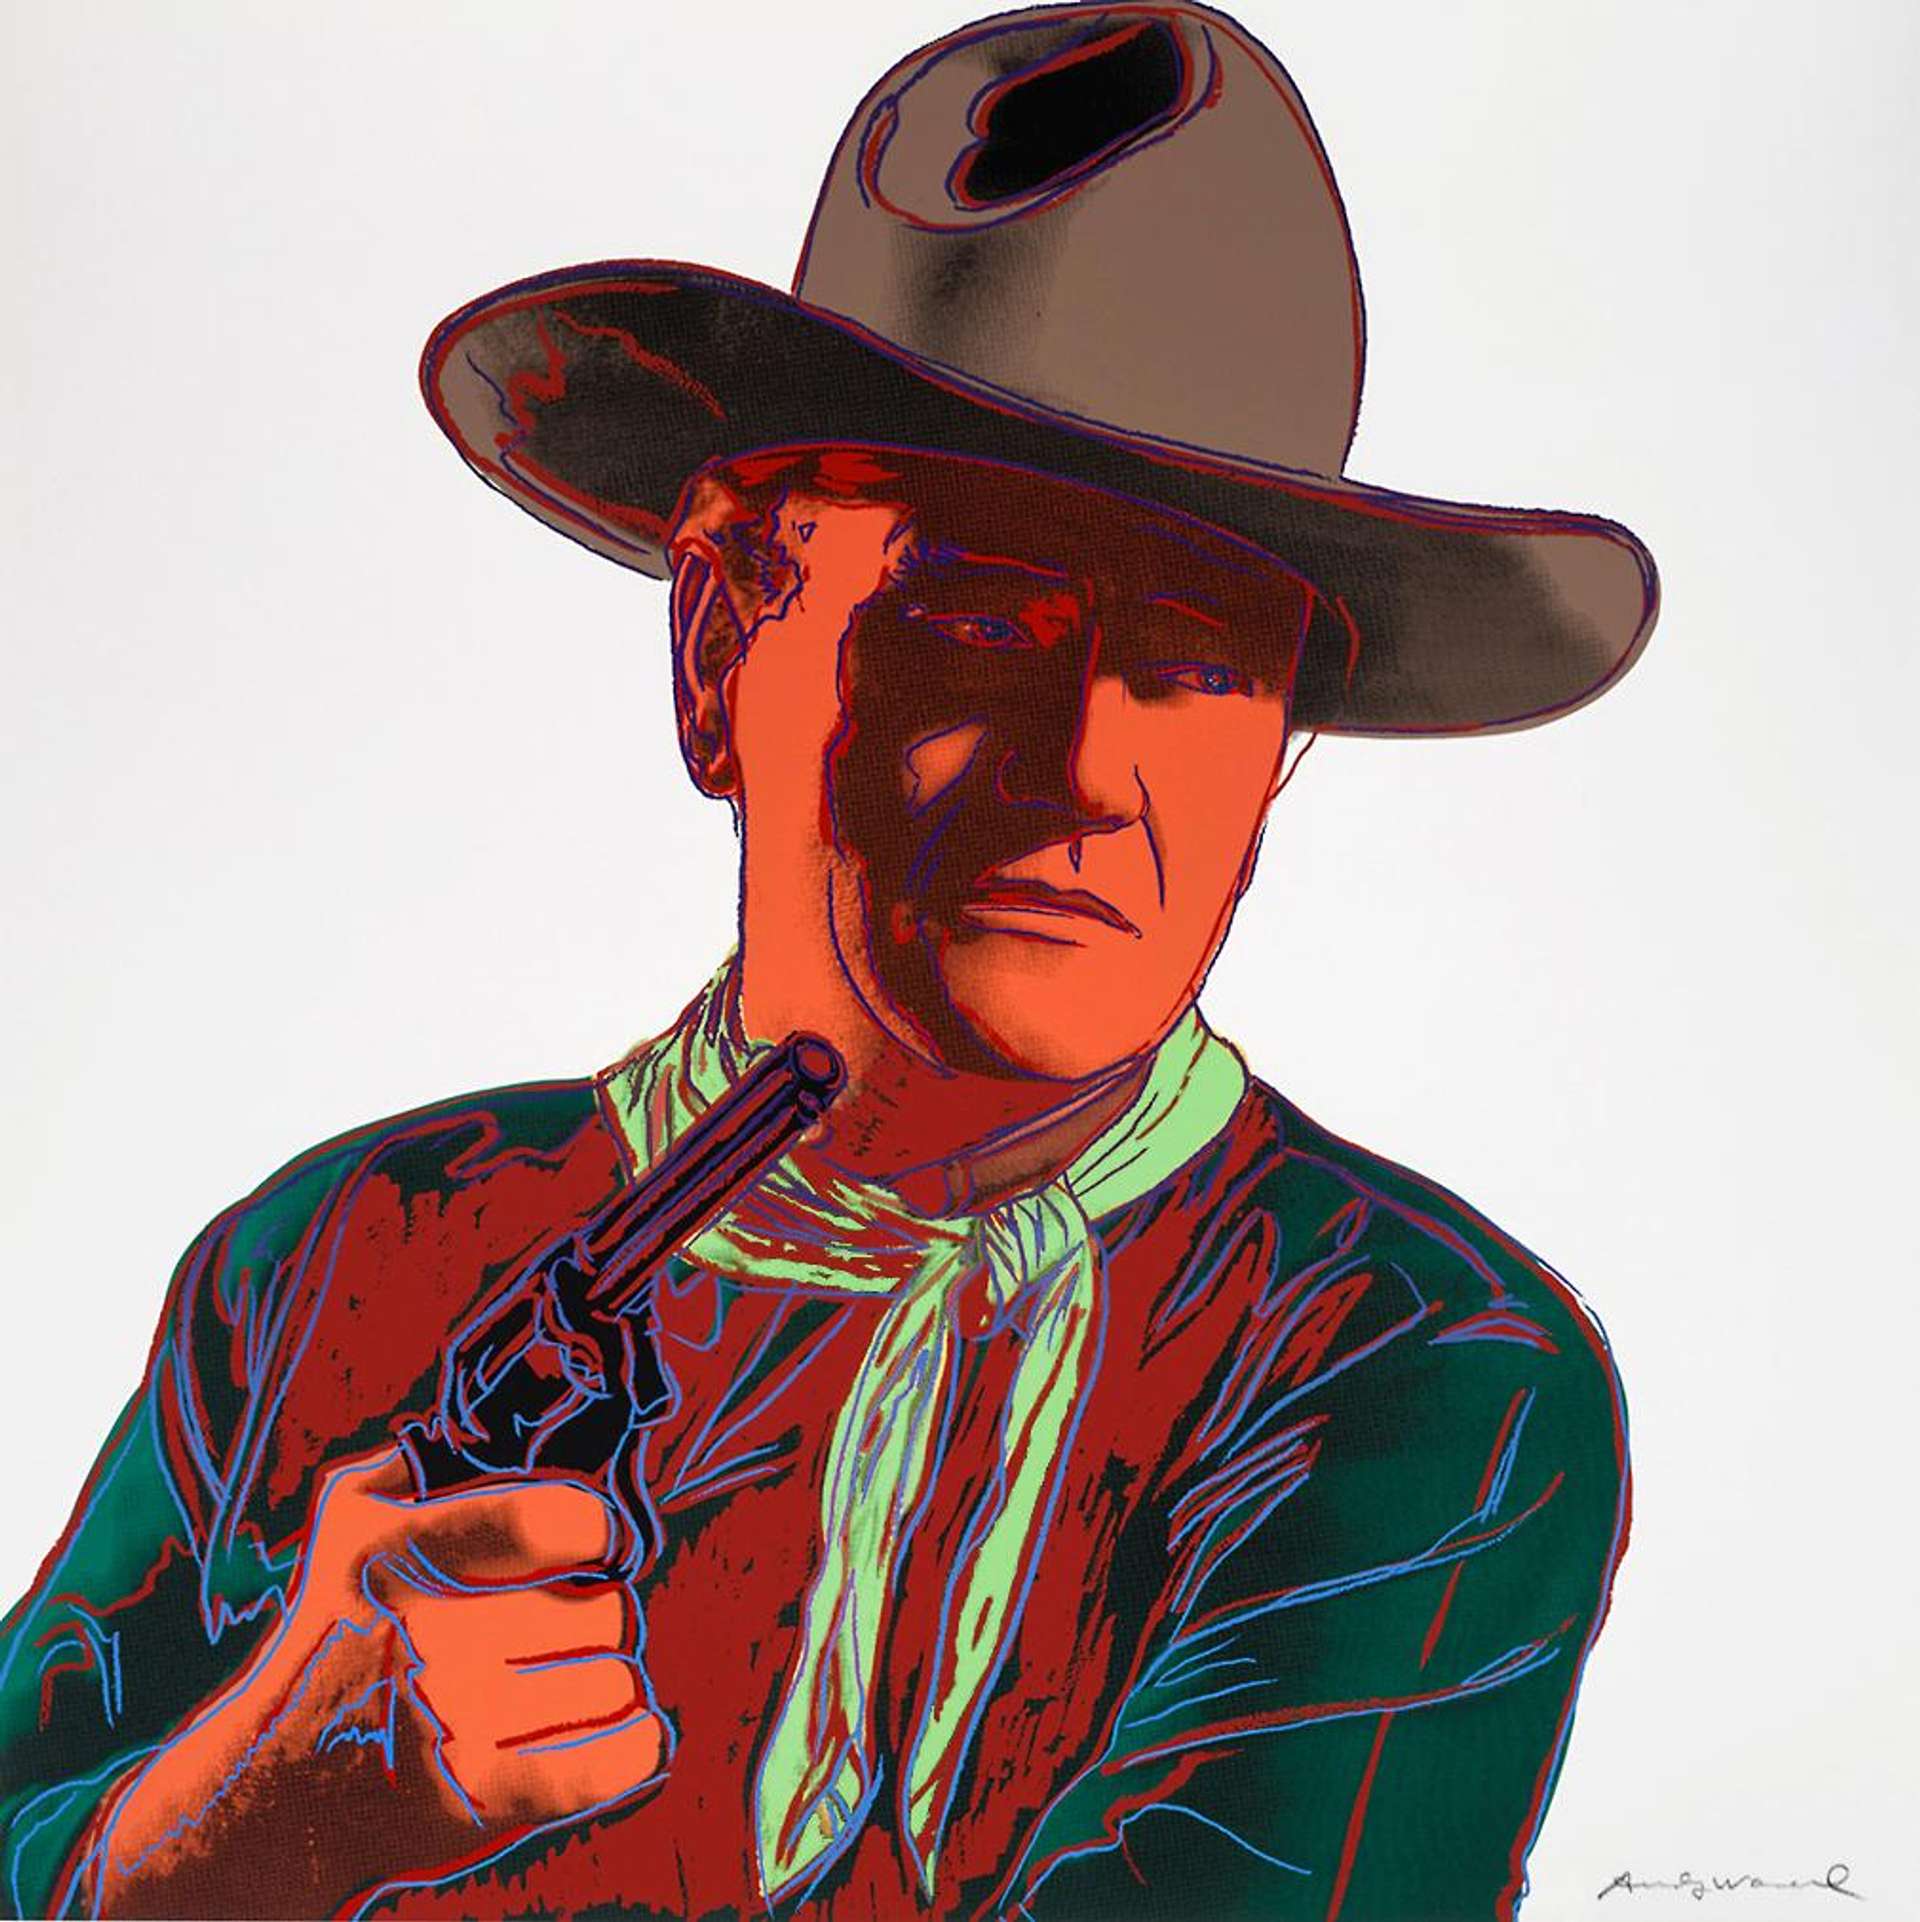 The print is rendered in unconventional bright colours against a white backdrop, with the addition of a pale green colour to Wayne's scarf and vivid orange colour used for the skin. John Wayne is shown in his iconic cowboy persona, complete with a Stetson hat and necktie, and is holding a revolver, pointing it towards the right side of the composition, in the direction of his gaze.